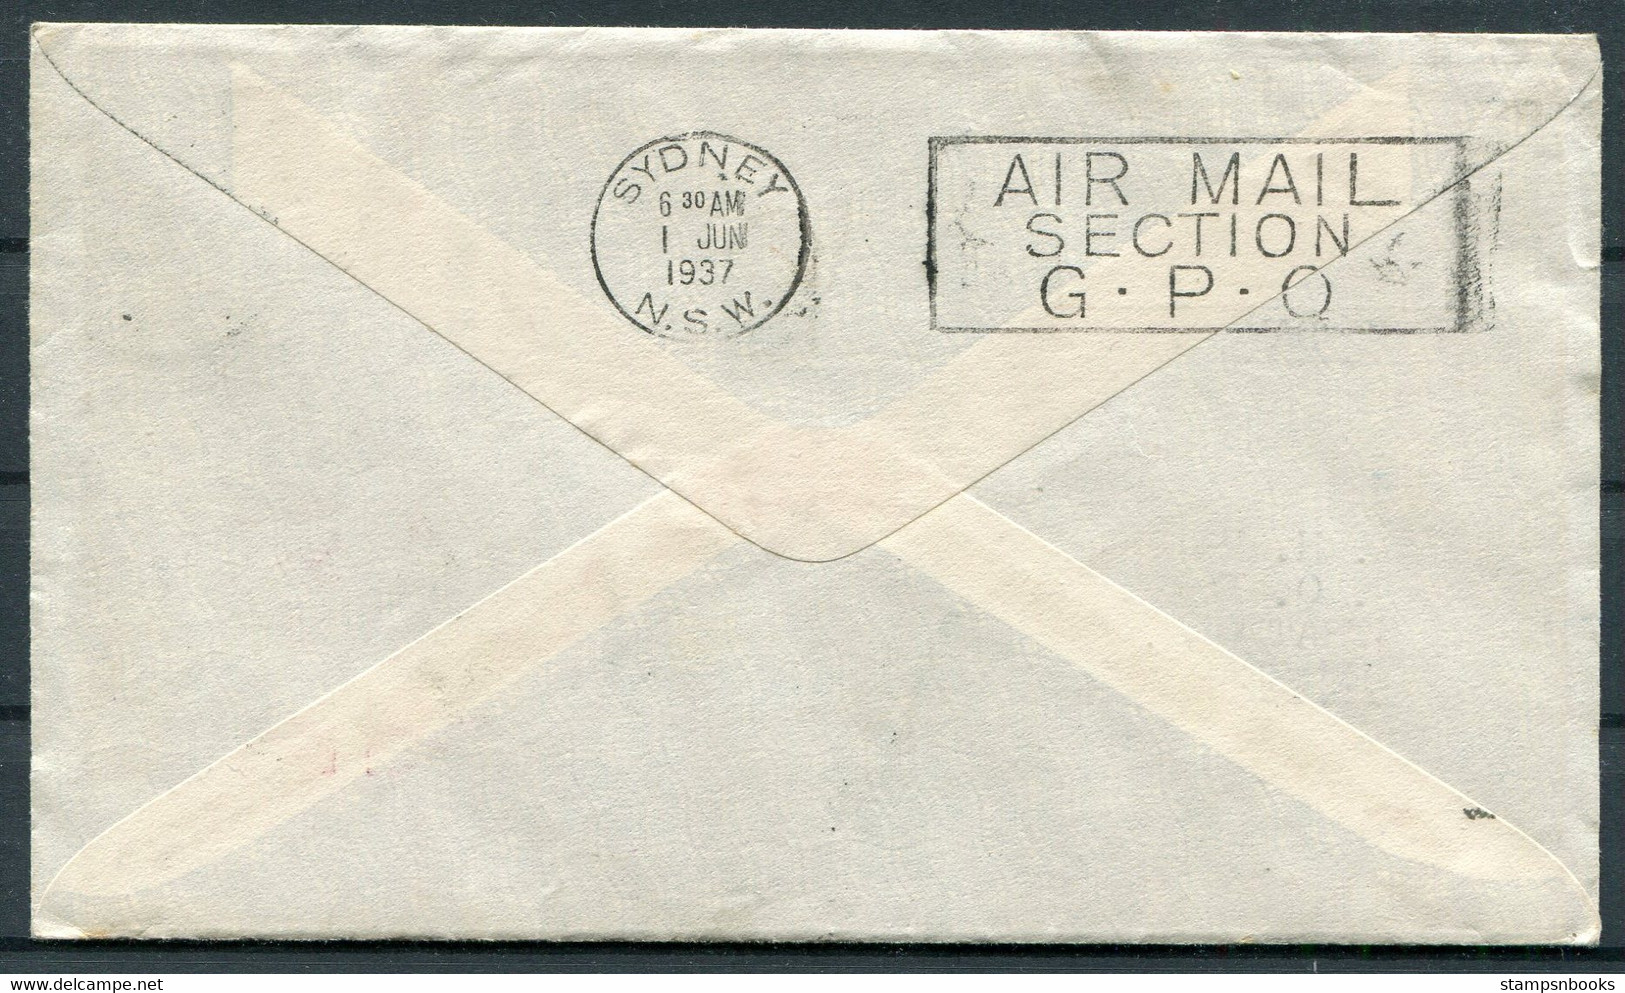 1937 South Africa Coronation First Day Cover, Imperial Airways Flight Benoni - New Zealand Via Sydney Australia Air Mail - Airmail